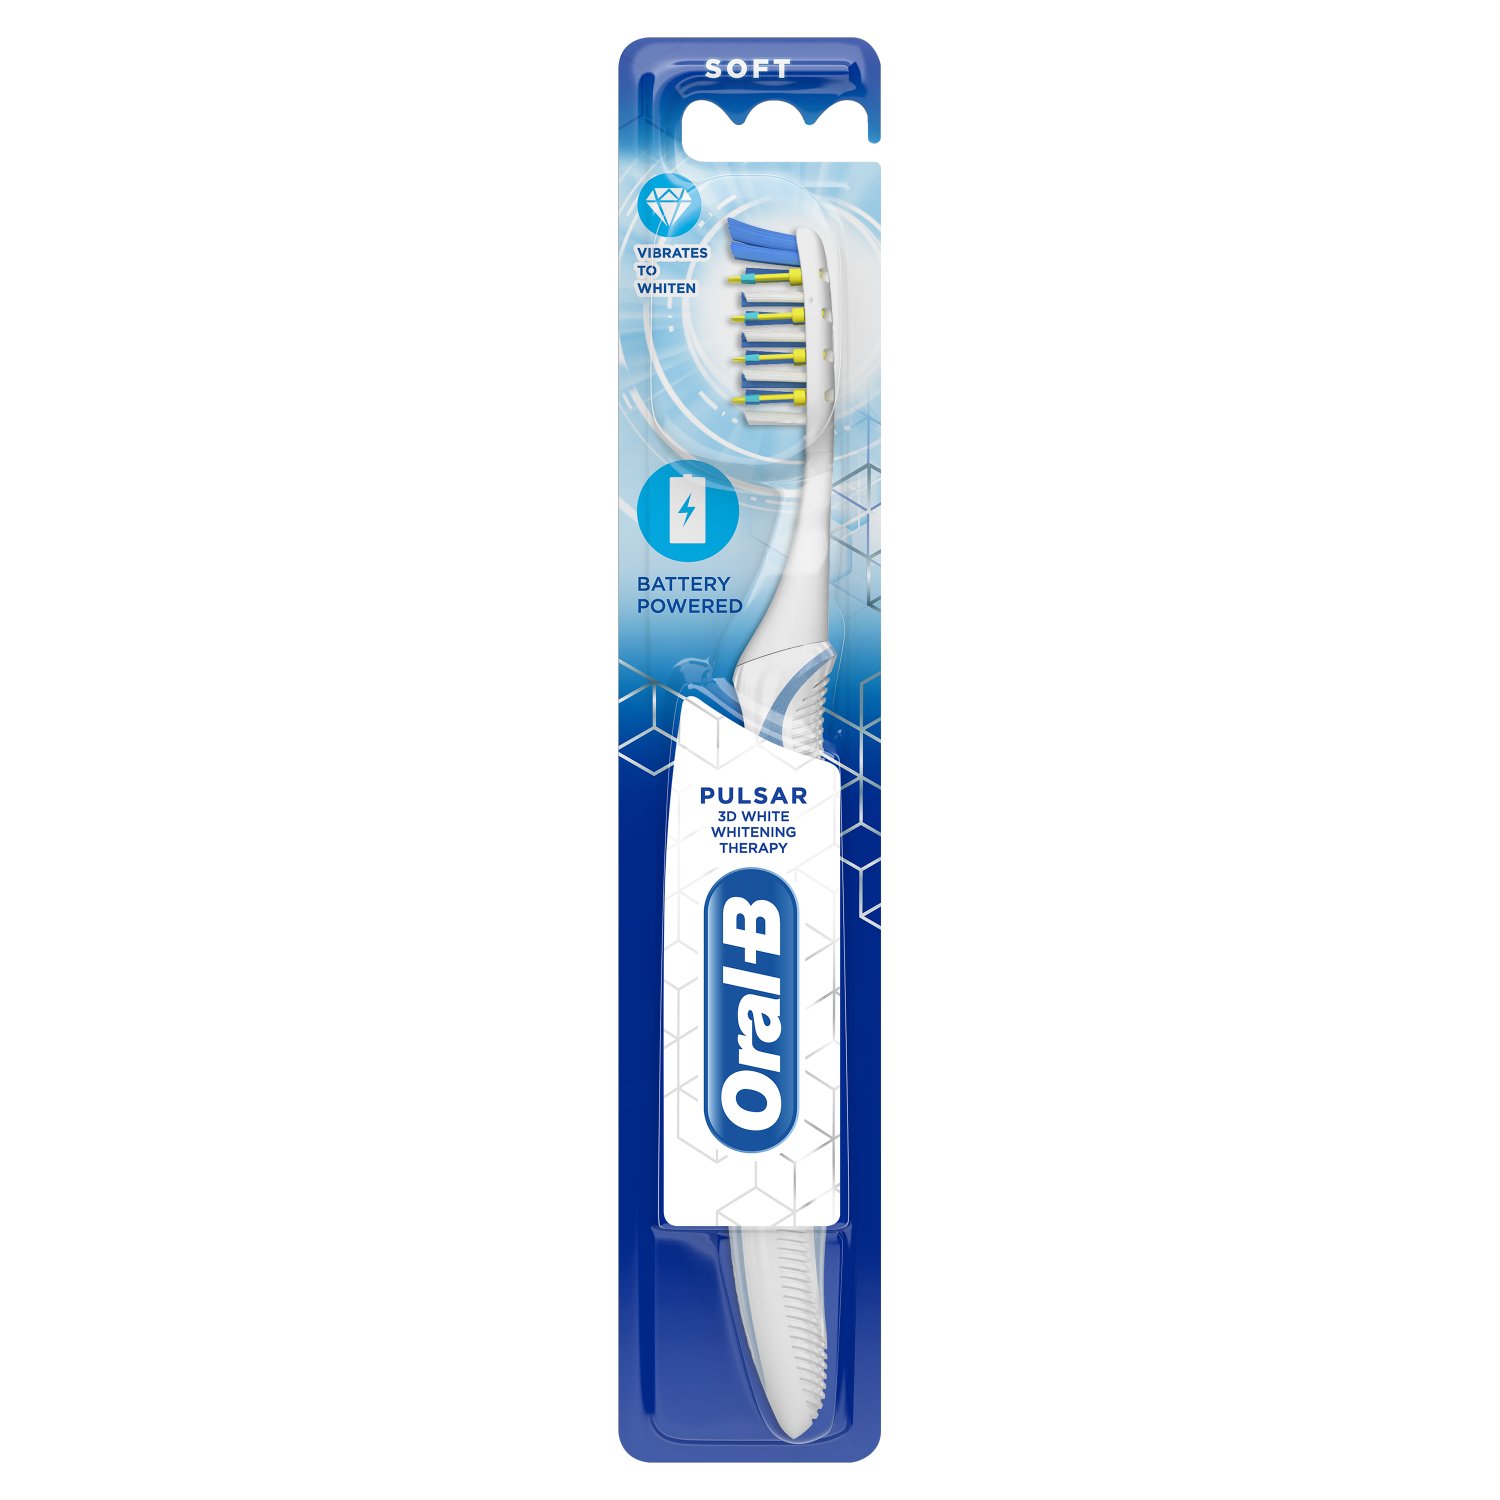 Oral-B Pulsar 3DWhite Whitening Therapy Soft Toothbrush (1 Piece)